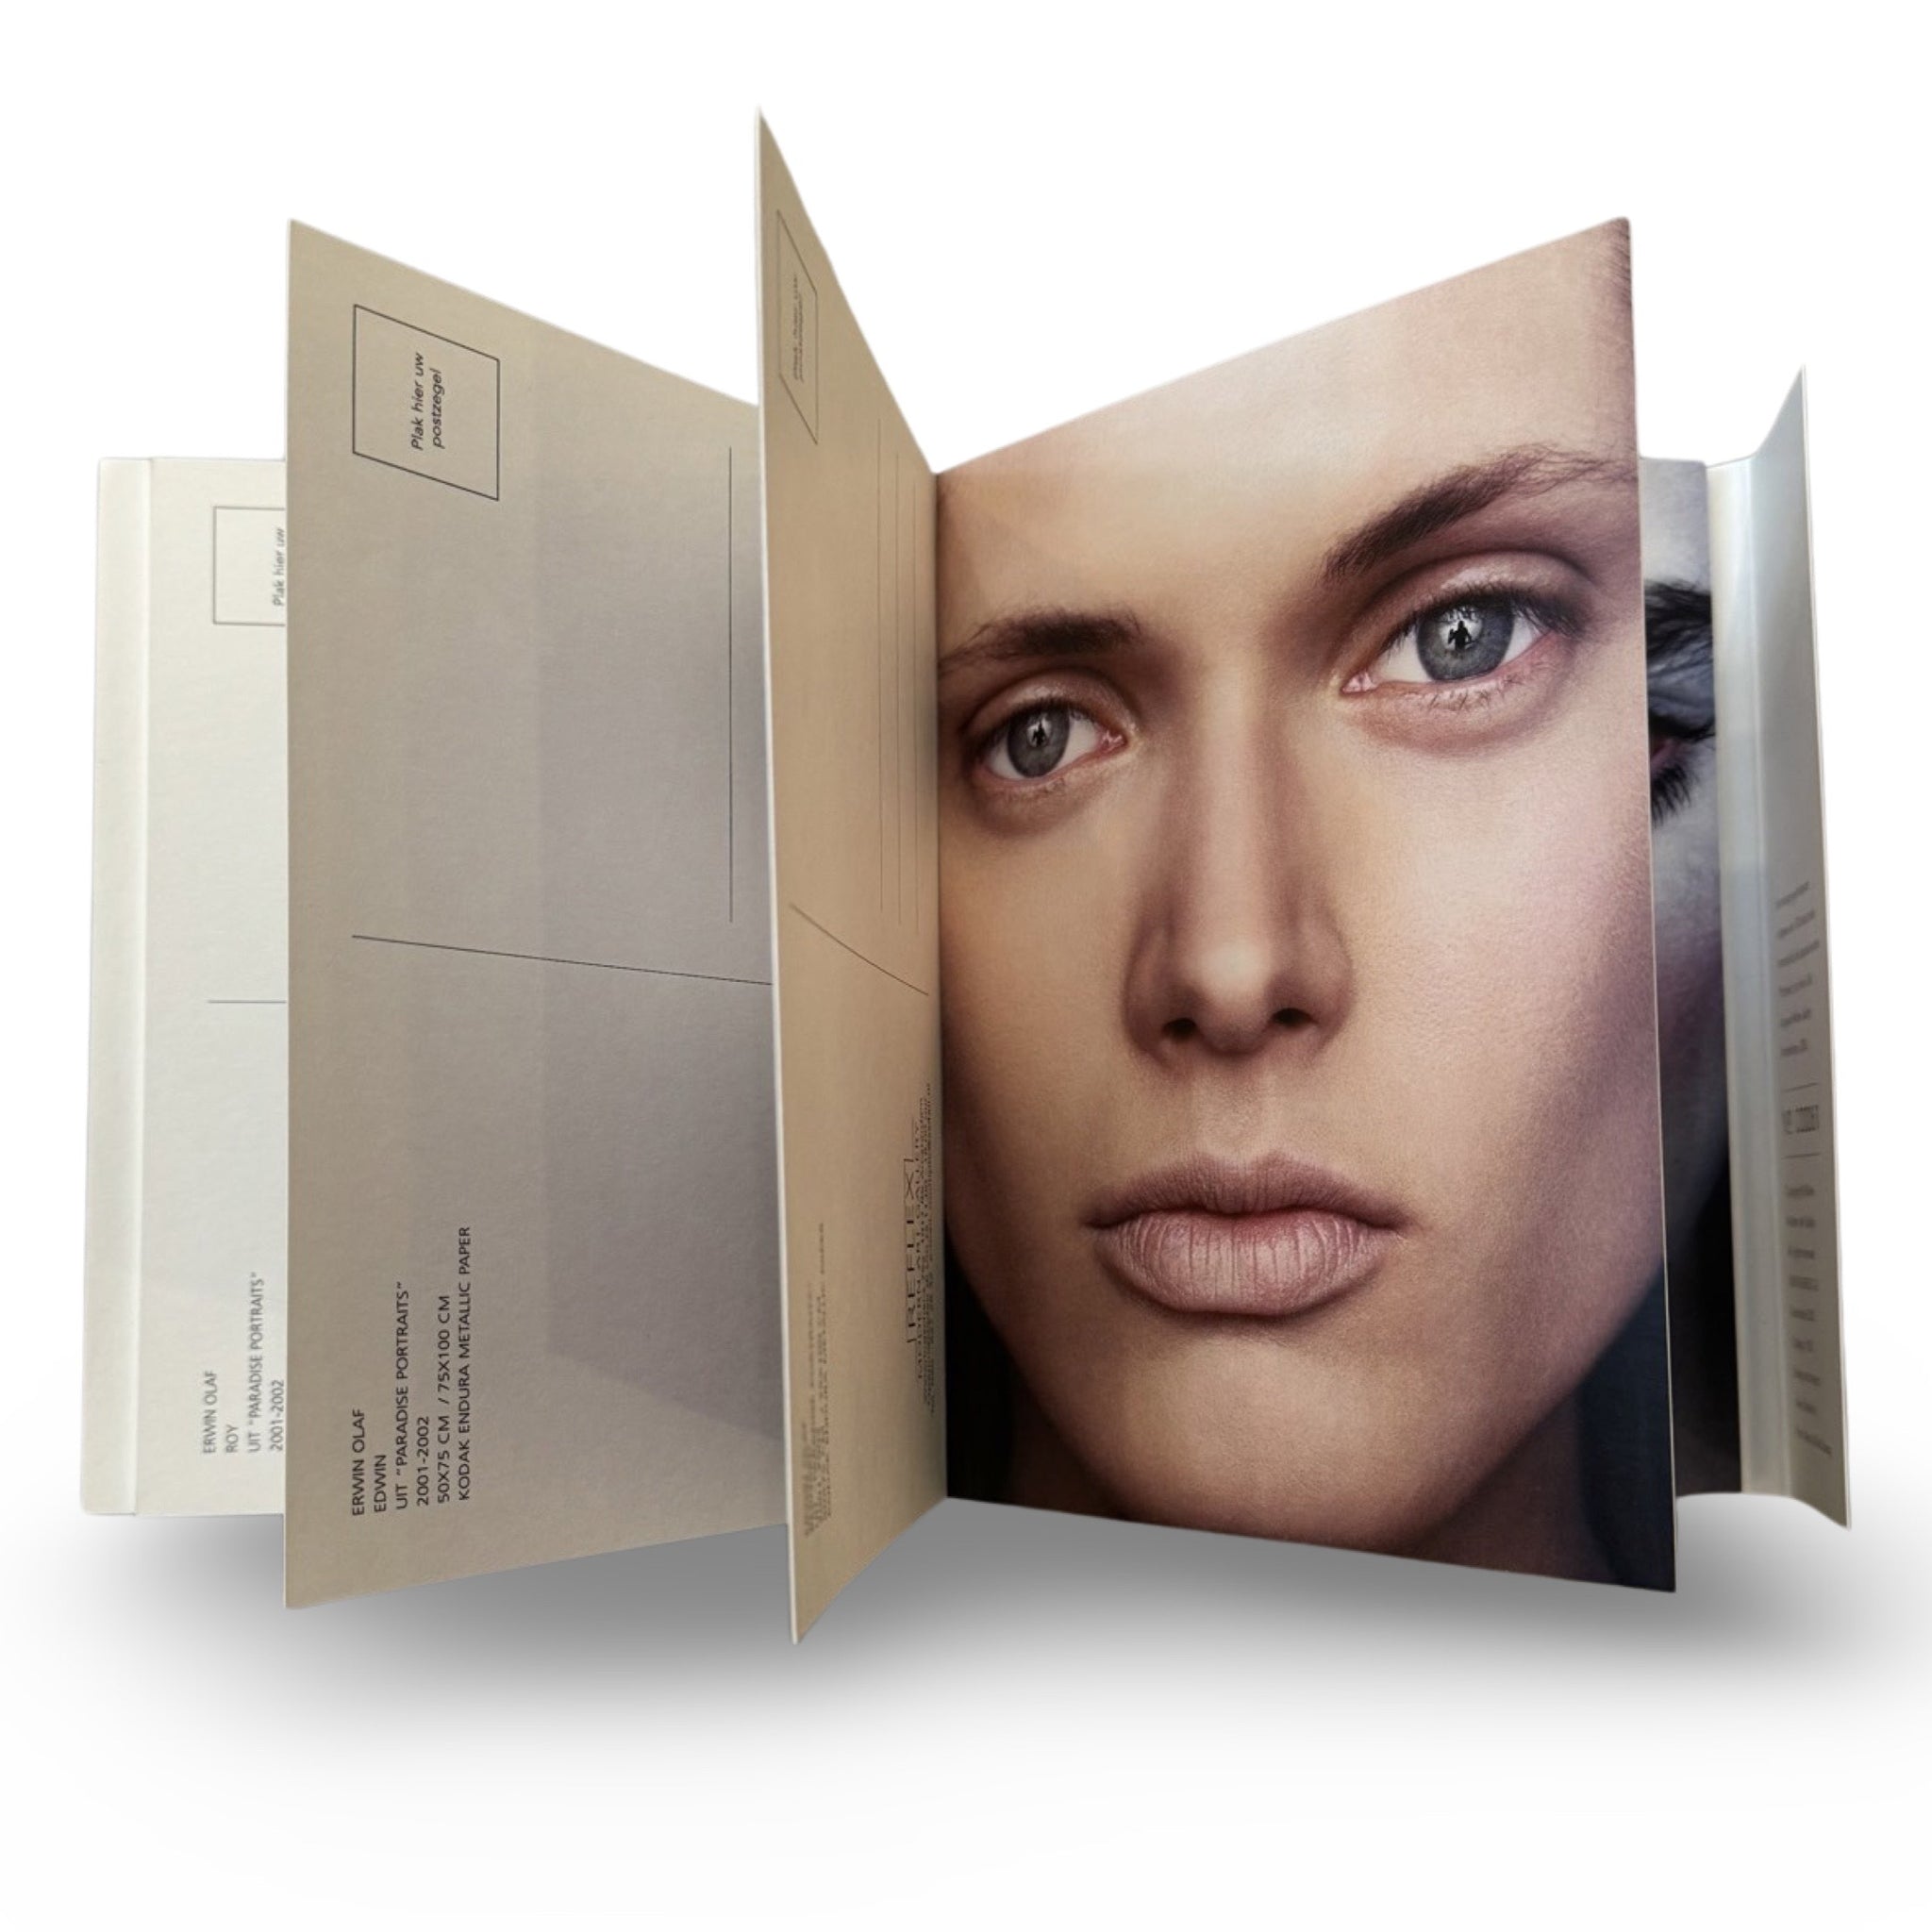 Erwin Olaf - Paradise Portraits, Tabara | complimentary Paradise Portraits collectors book included